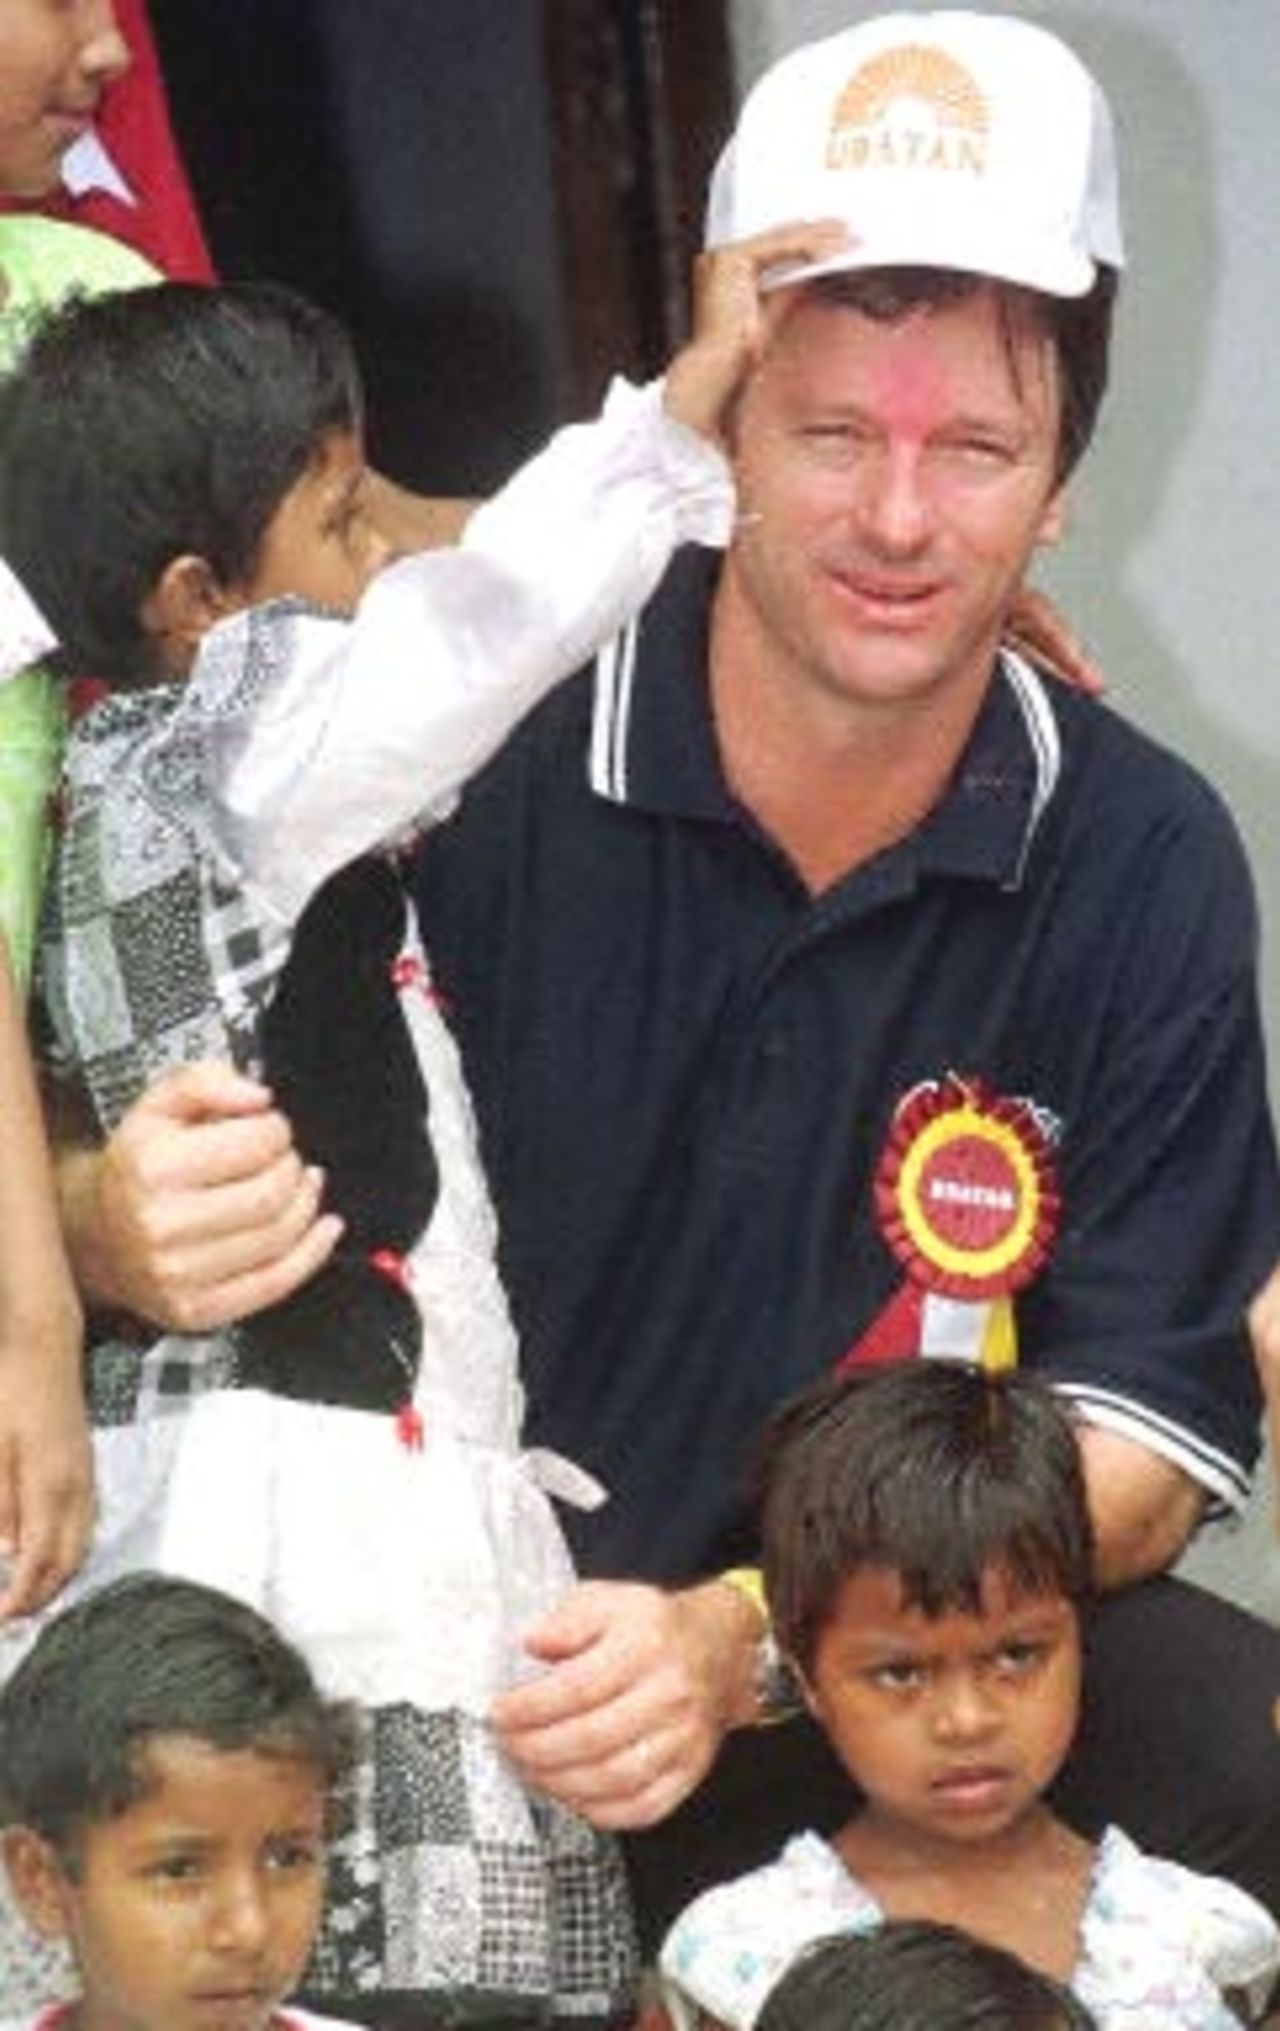 A small girl puts a cap to Steve Waugh, the Australian skipper, at Udayan a home for destitute kids in Barrackpore close to Calcutta 20 April 2000. Steve Waugh came here to open a new girls wing at Udayan and spend some time with the children. He has extended his support for the home since couple of years.